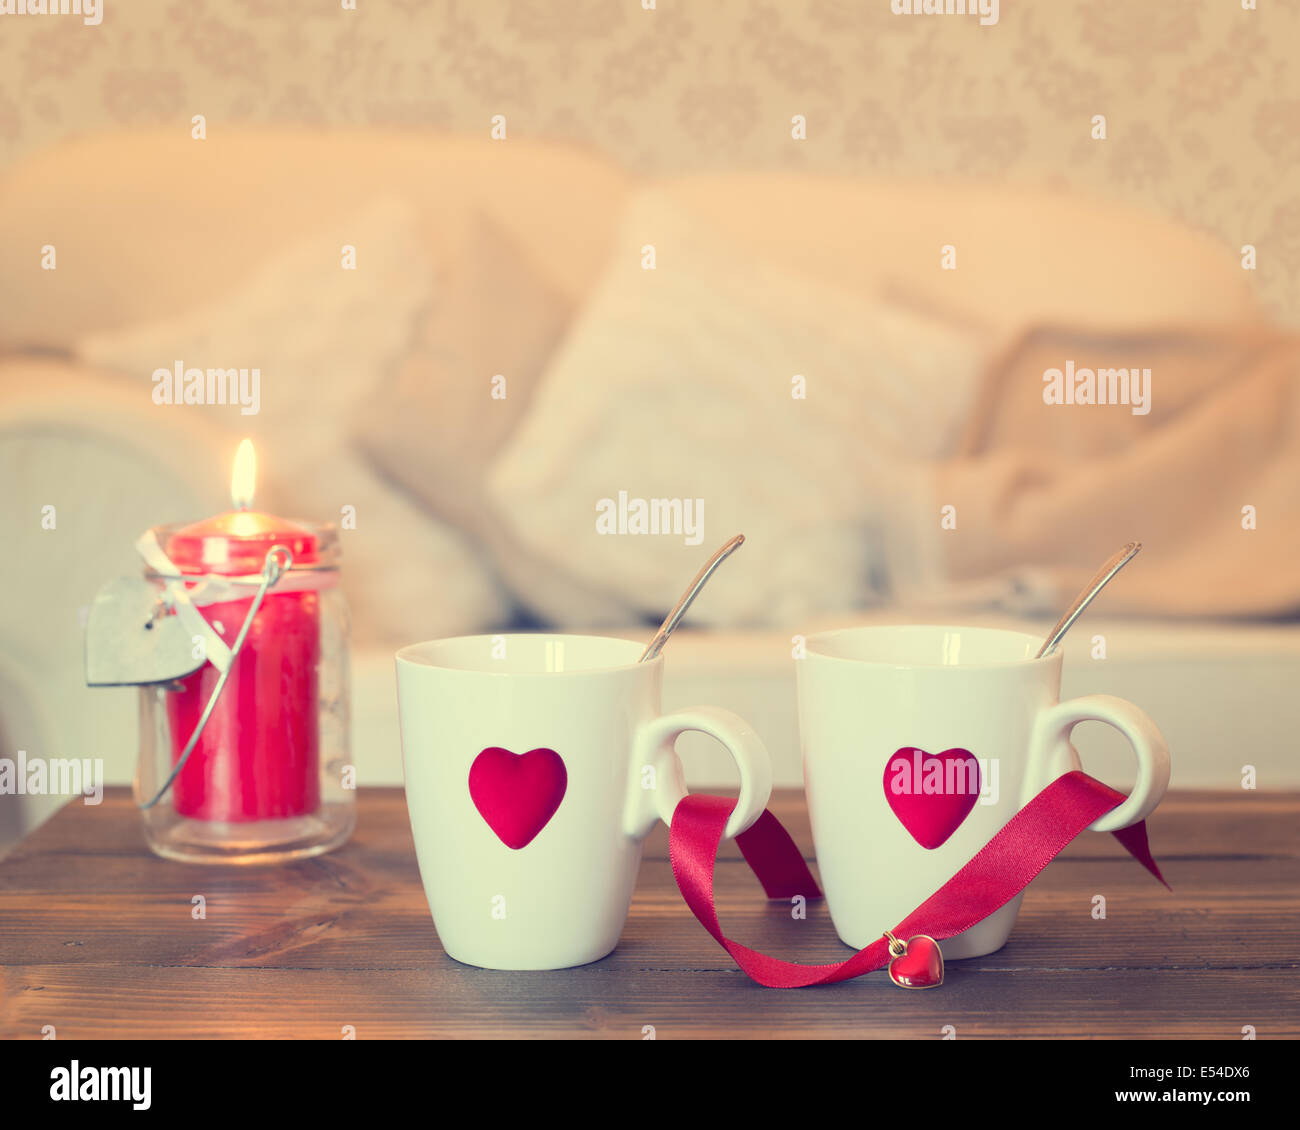 Two teacups with heart decoration - vintage effect added Stock Photo